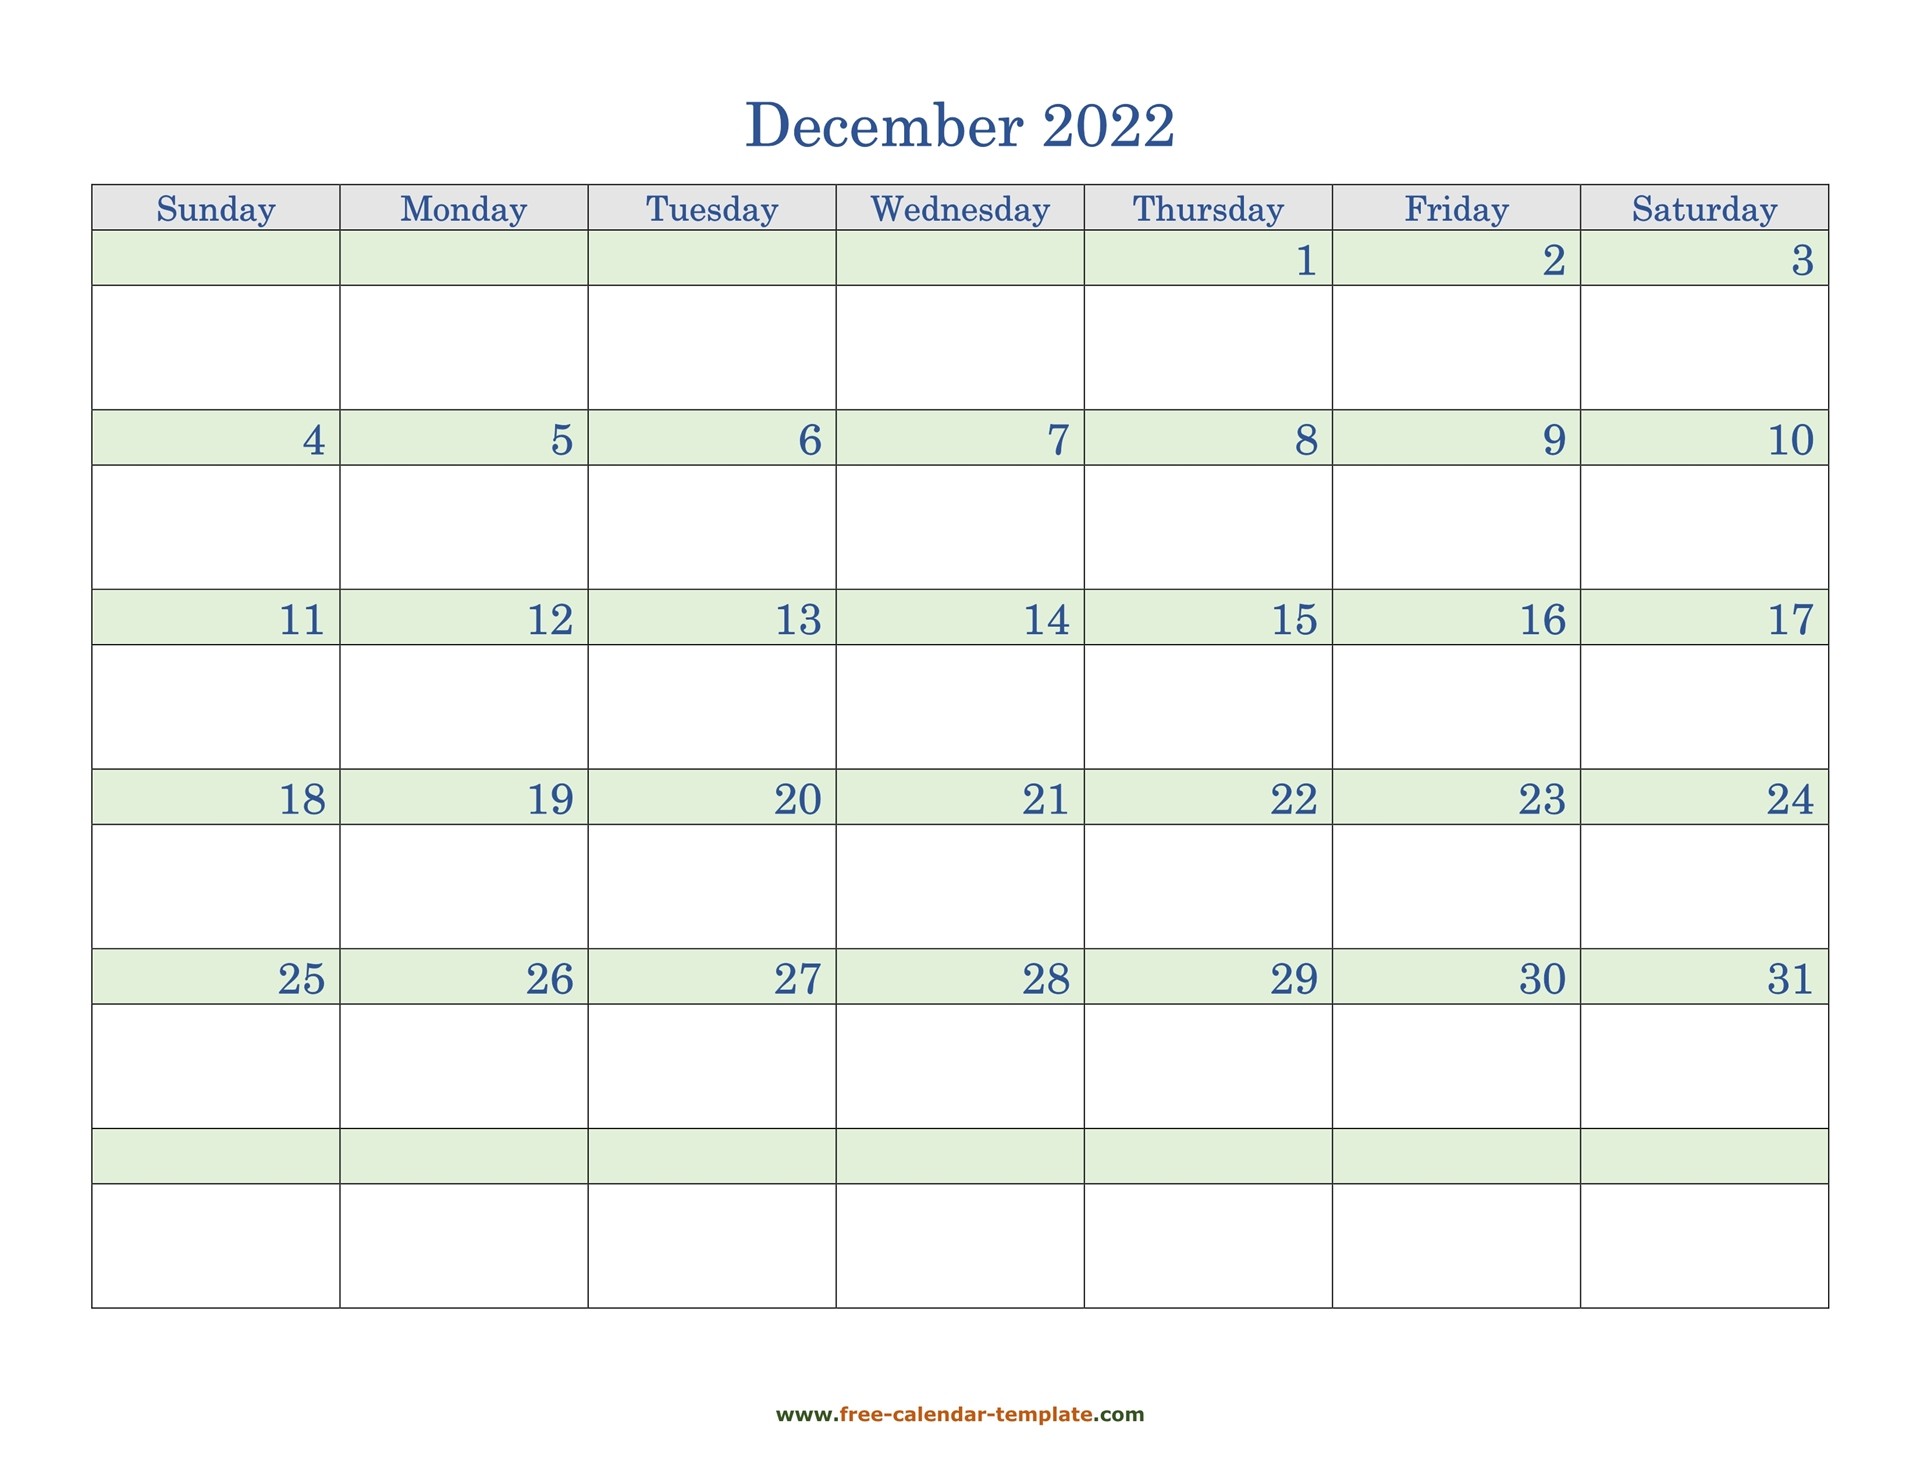 Free December 2022 Calendar, Coloring On Each Day